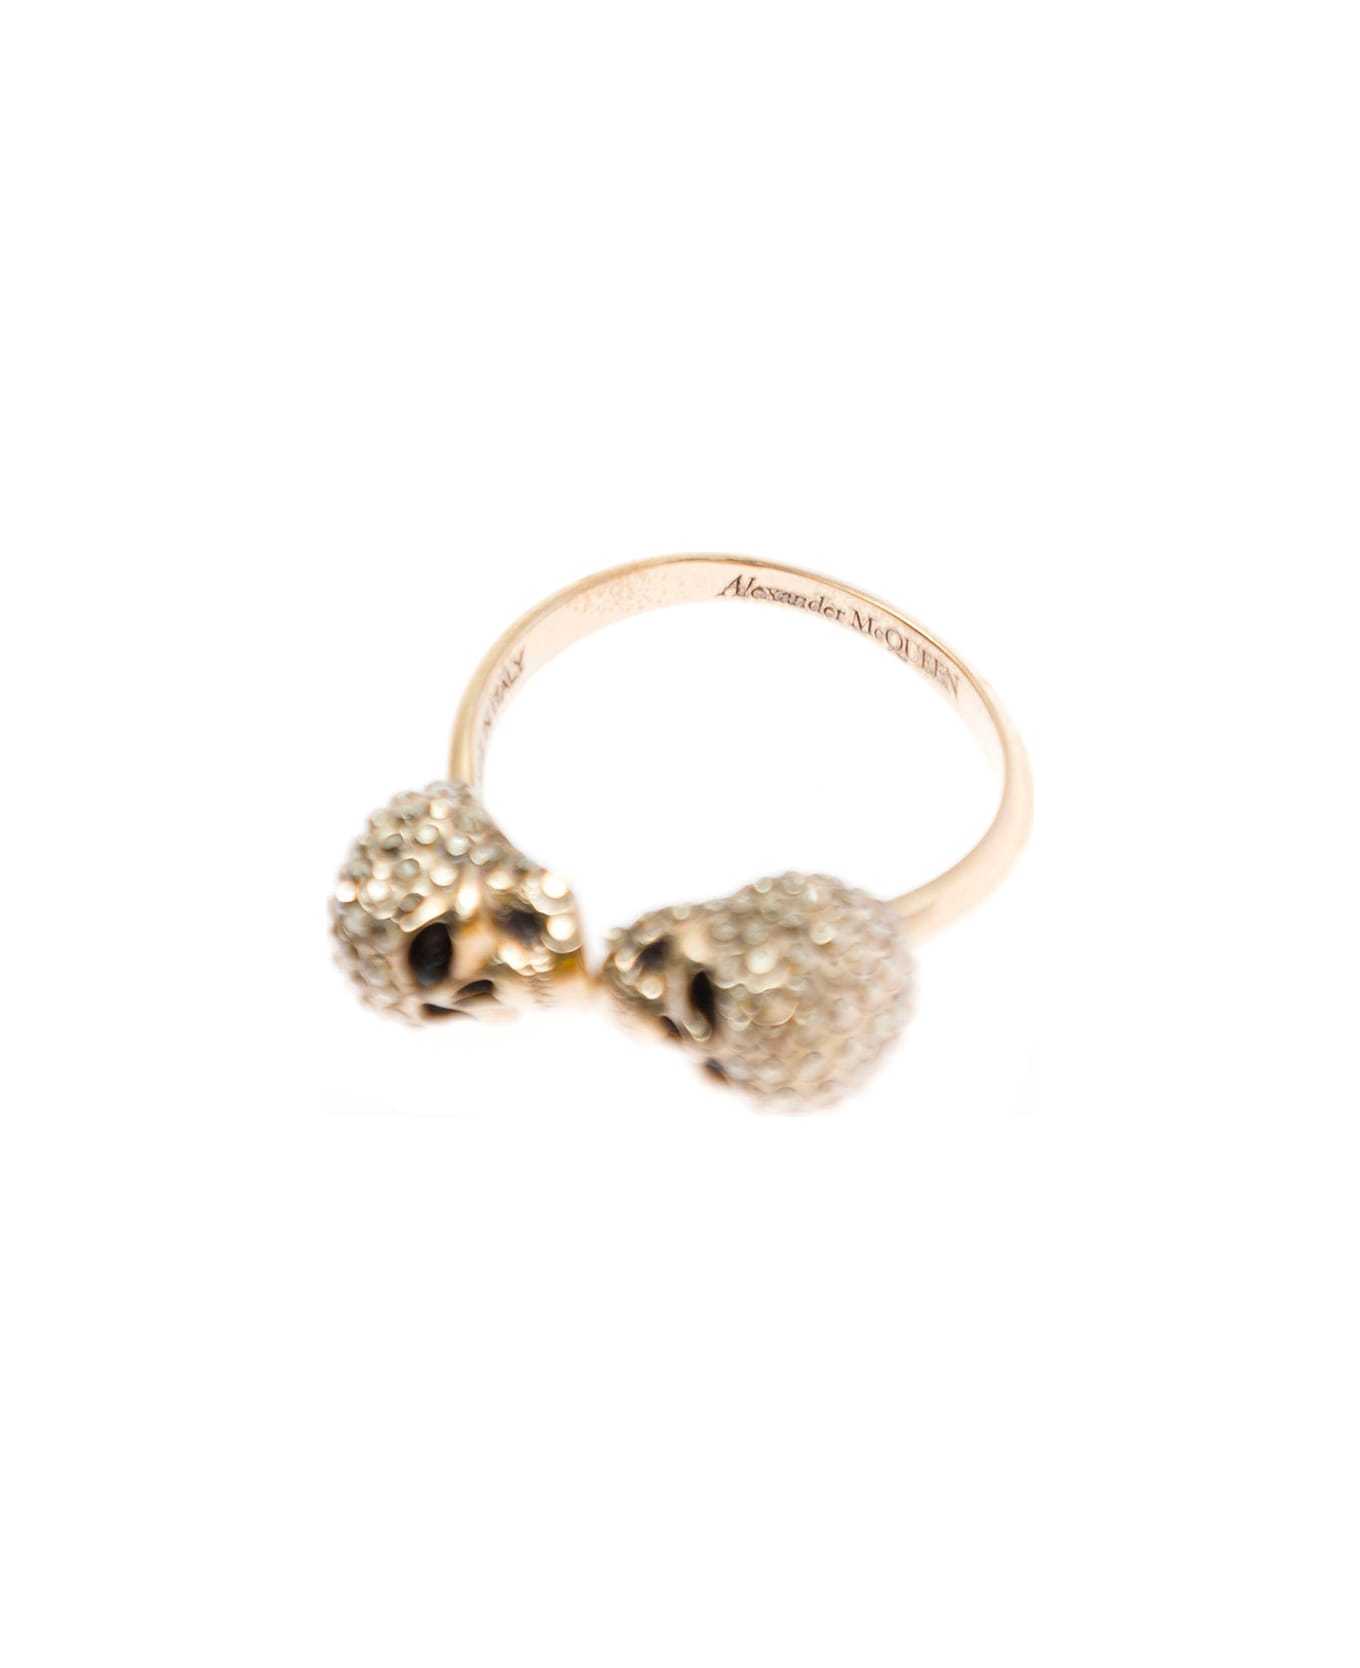 Alexander McQueen Woman's Brass Twin Skull Ring With Crystals Applied - Metallic